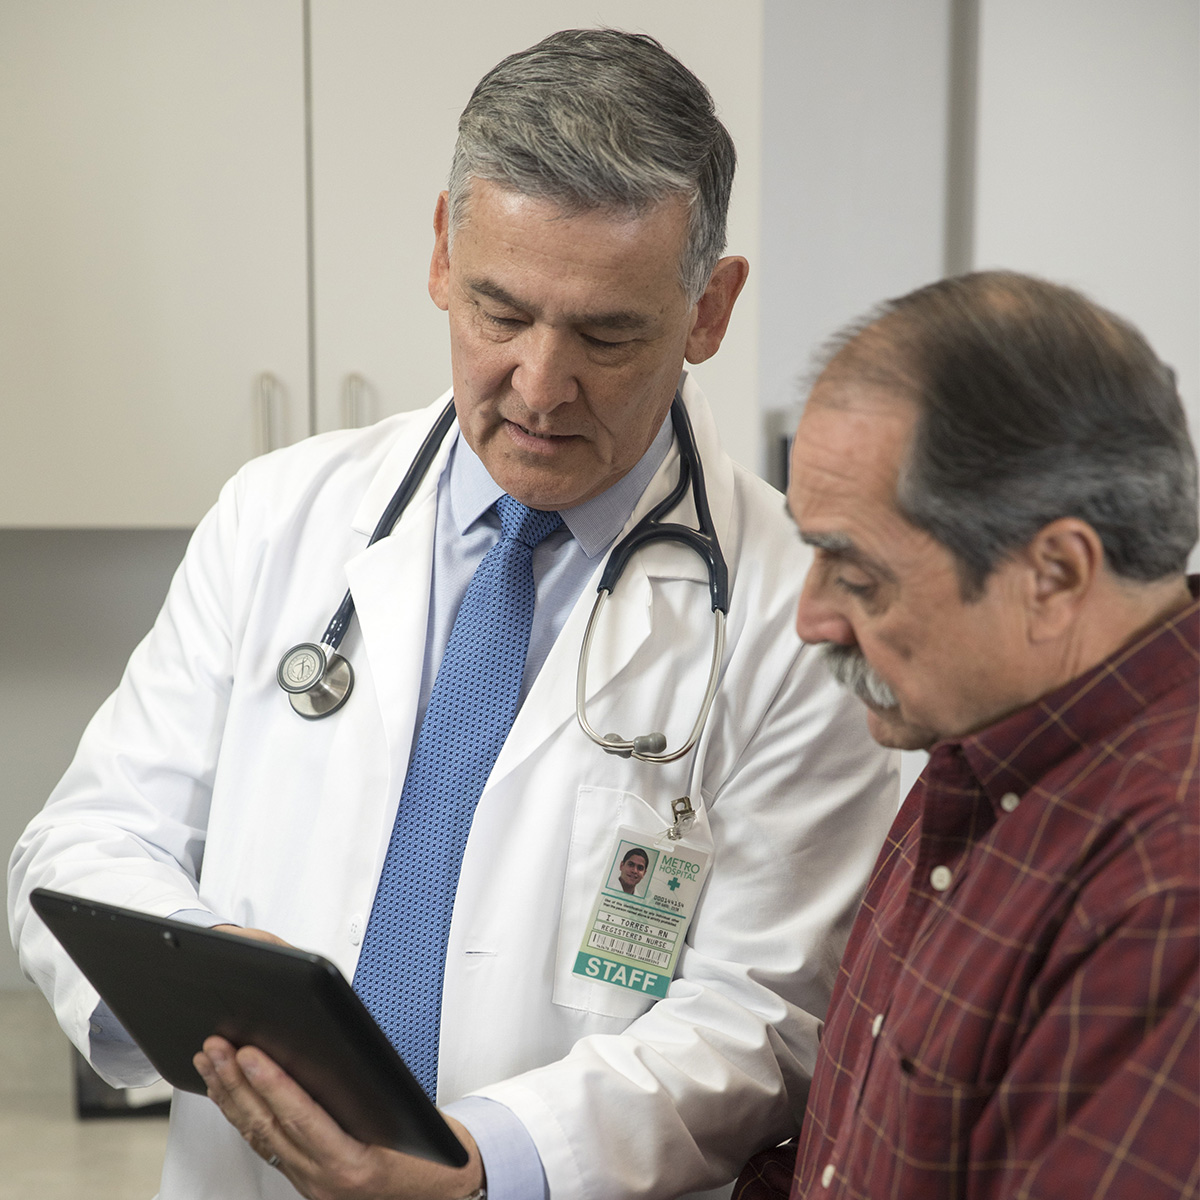 Male doctor showing information on electronic device to male patient